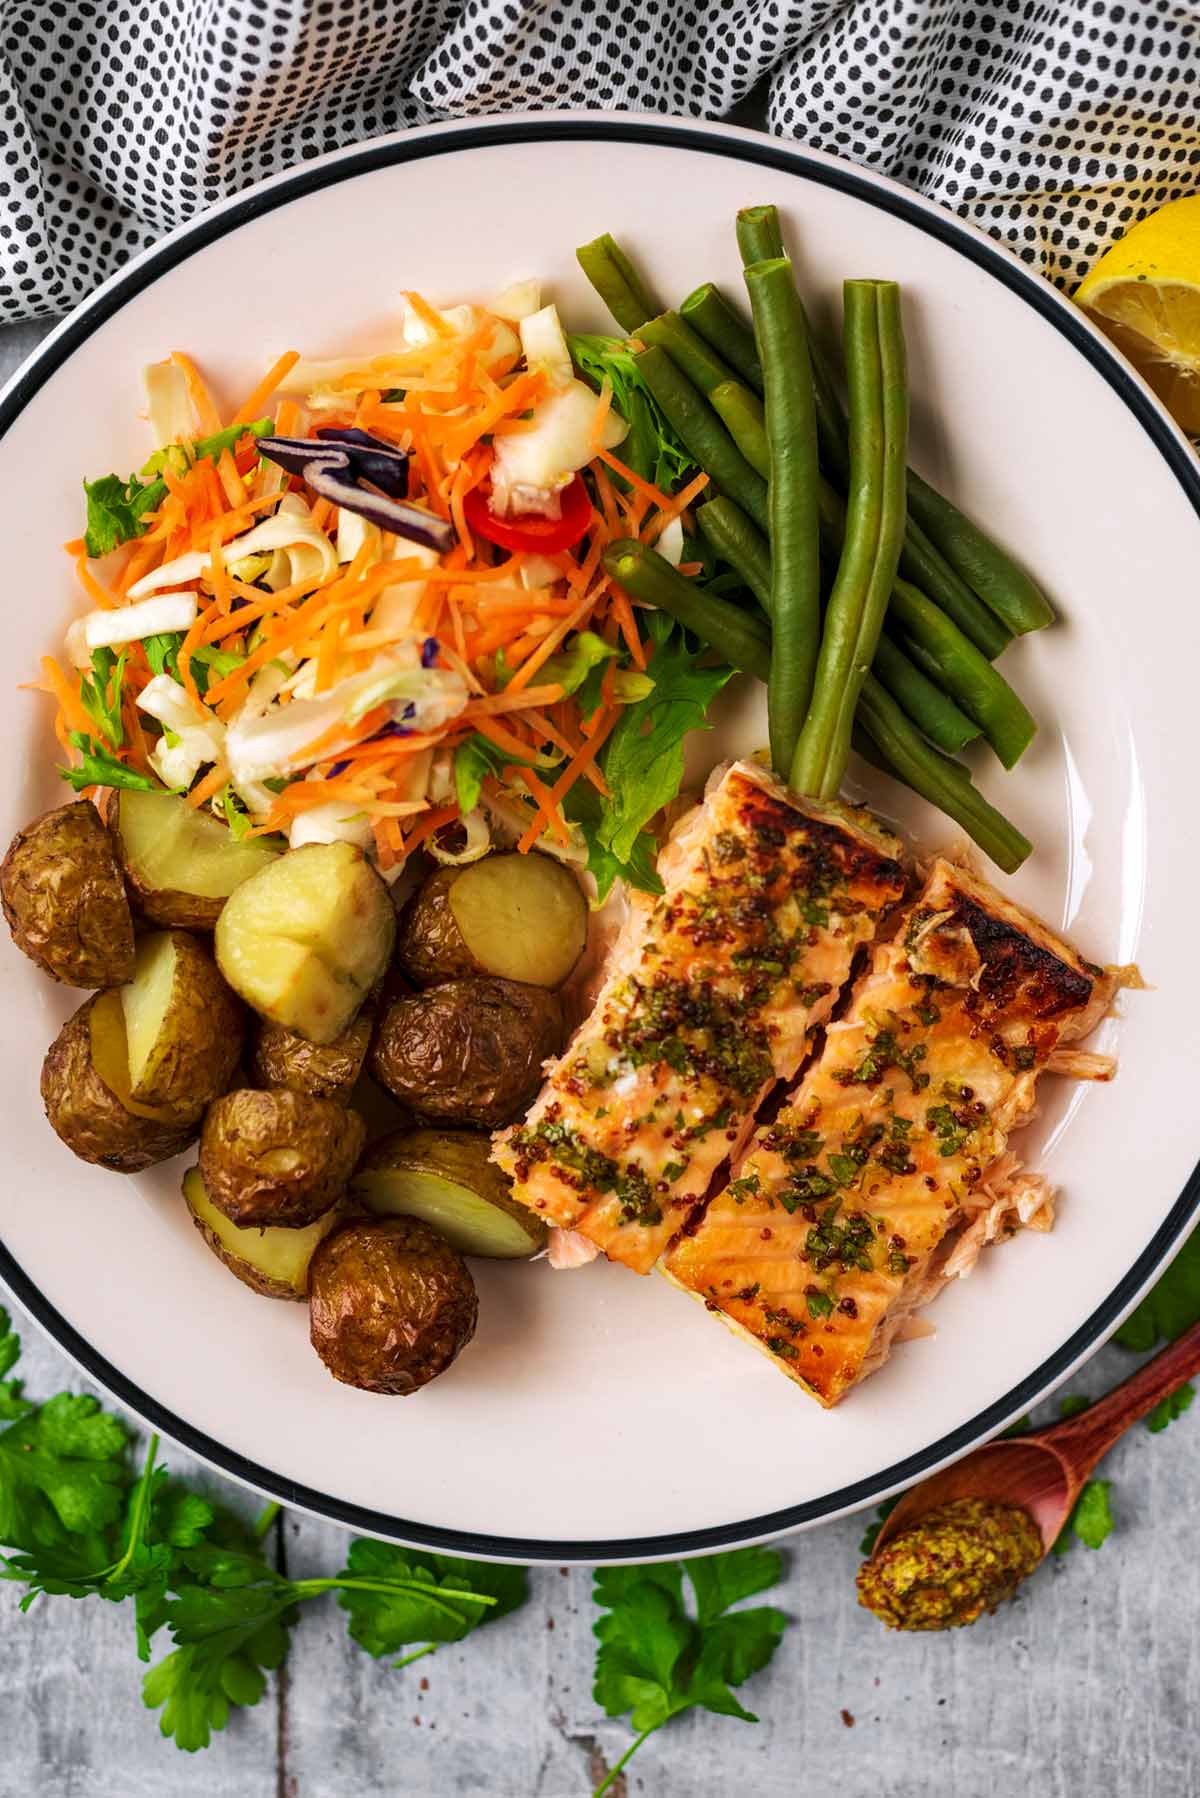 Two cooked salmon fillets on a plate with roasted potatoes, green beans and salad.